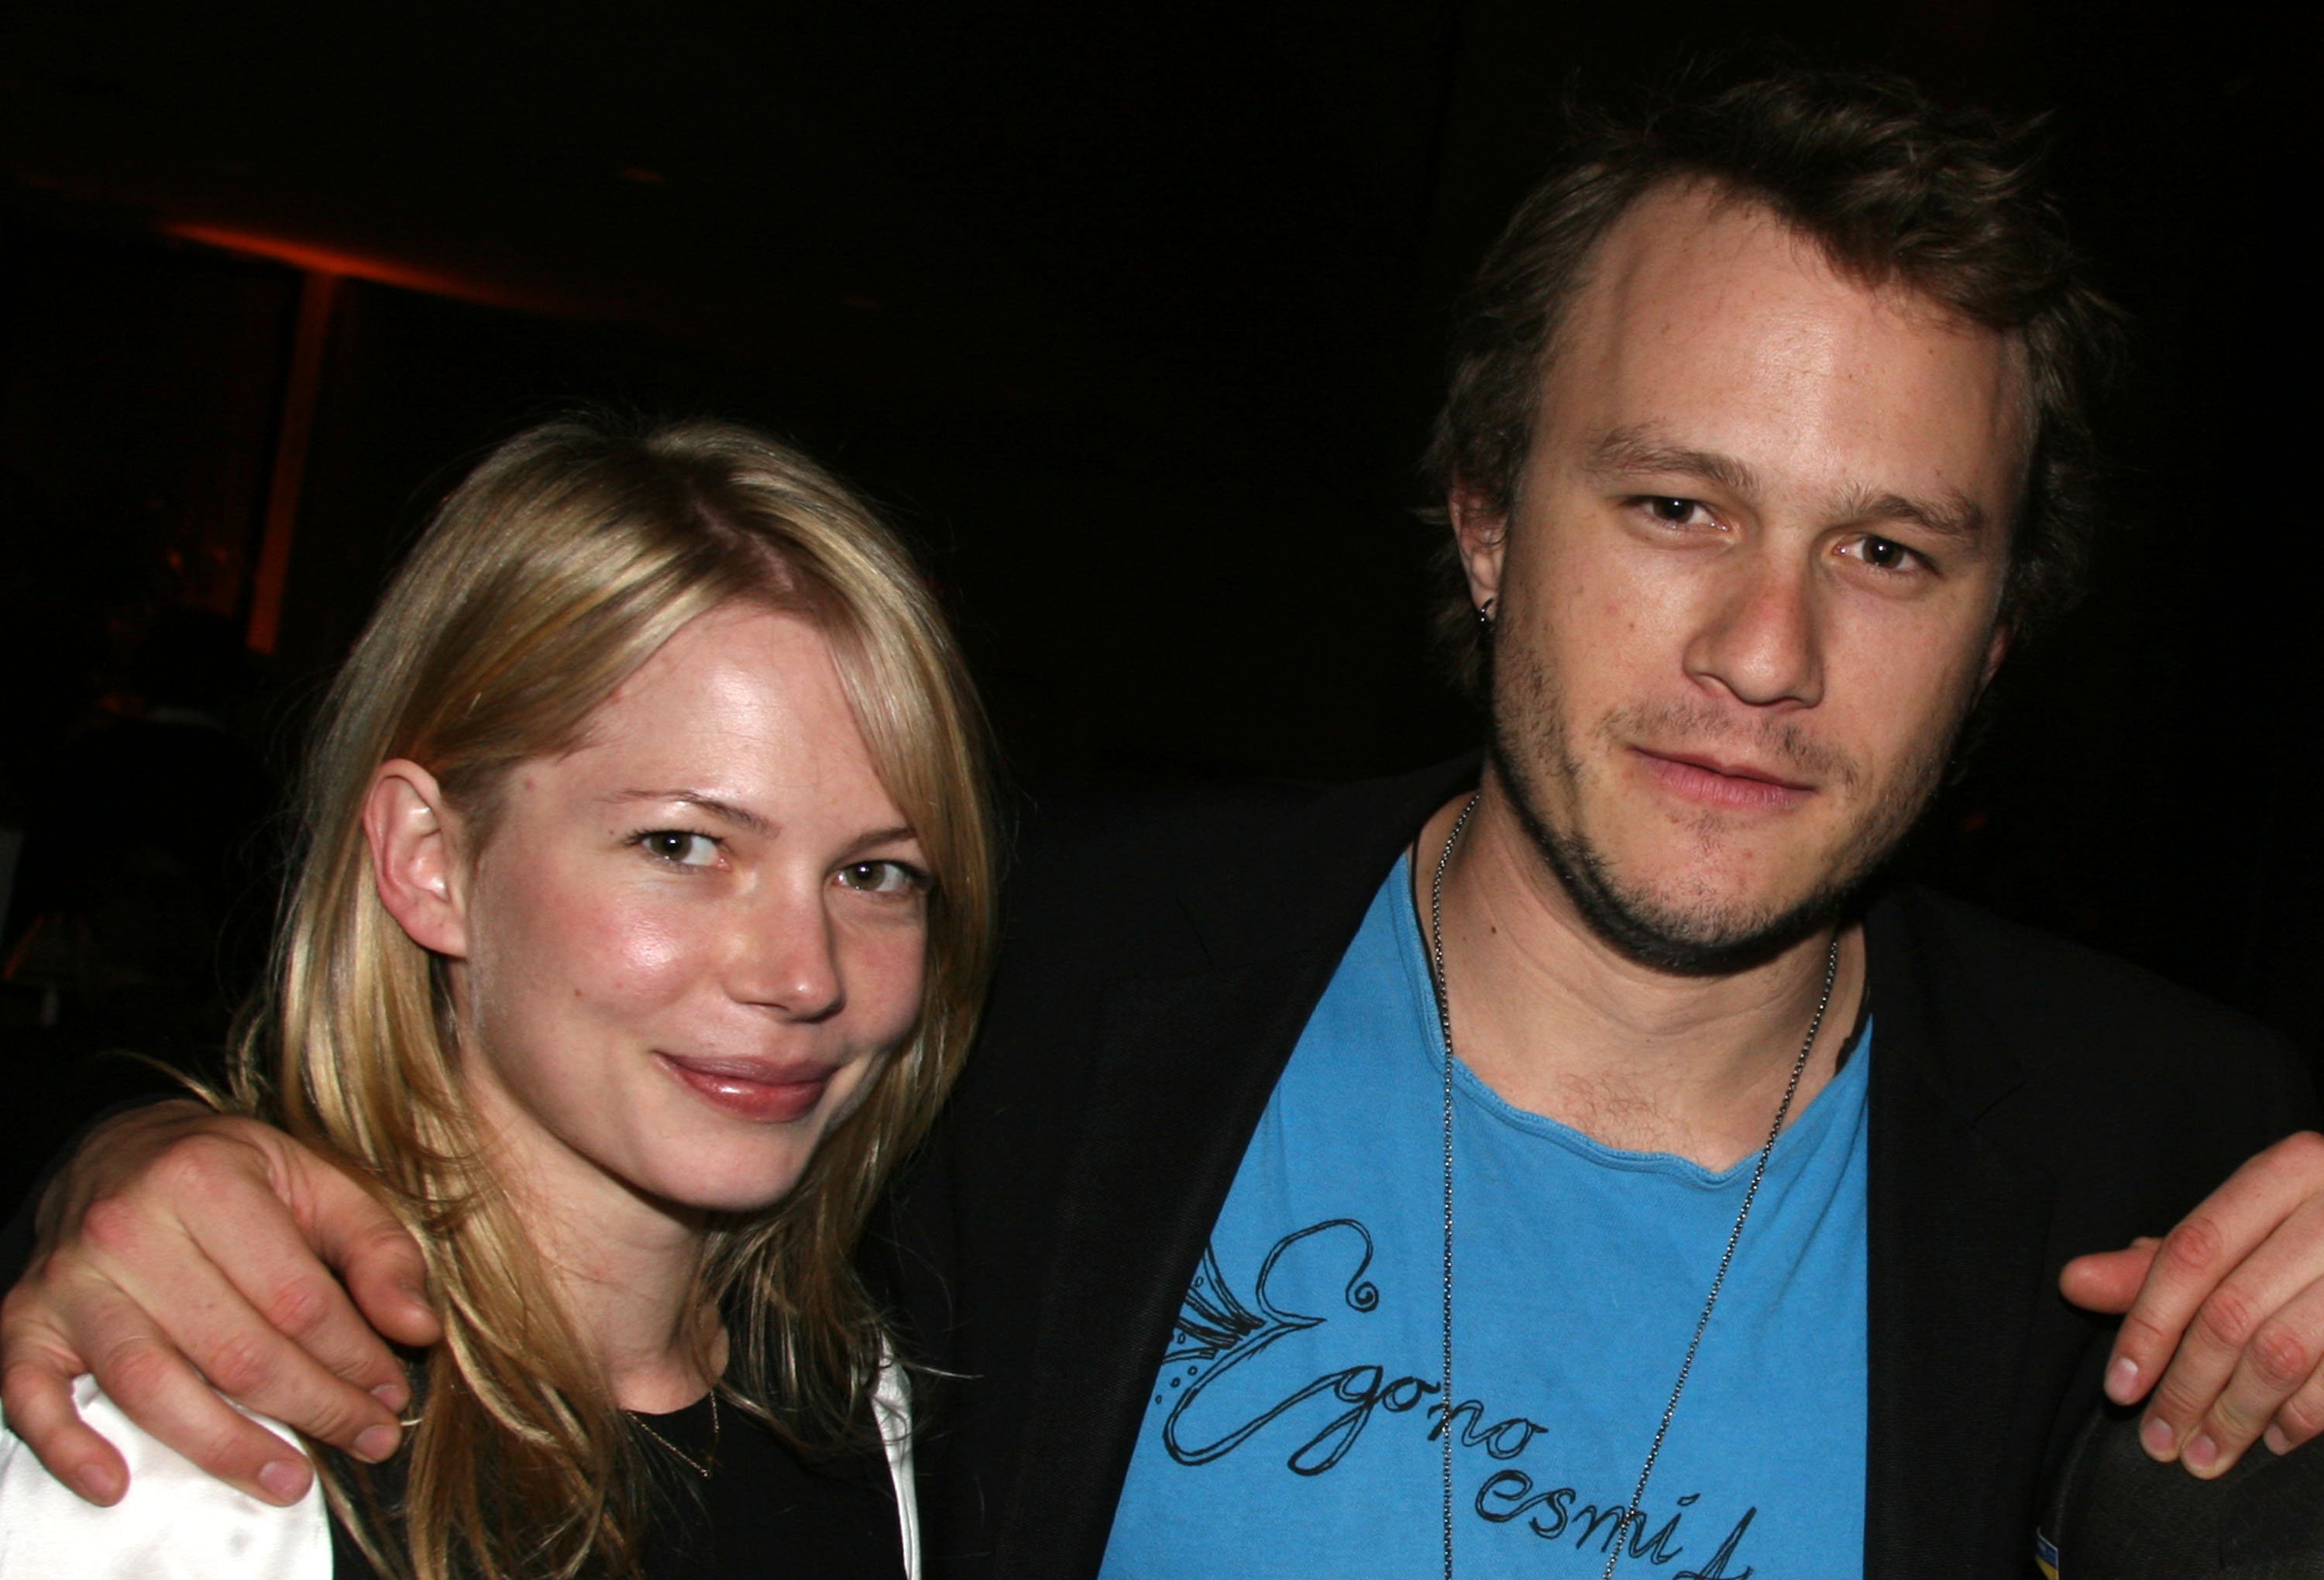 Heath Ledger and Michelle Williams in New York in 2006. | Source: Getty Images